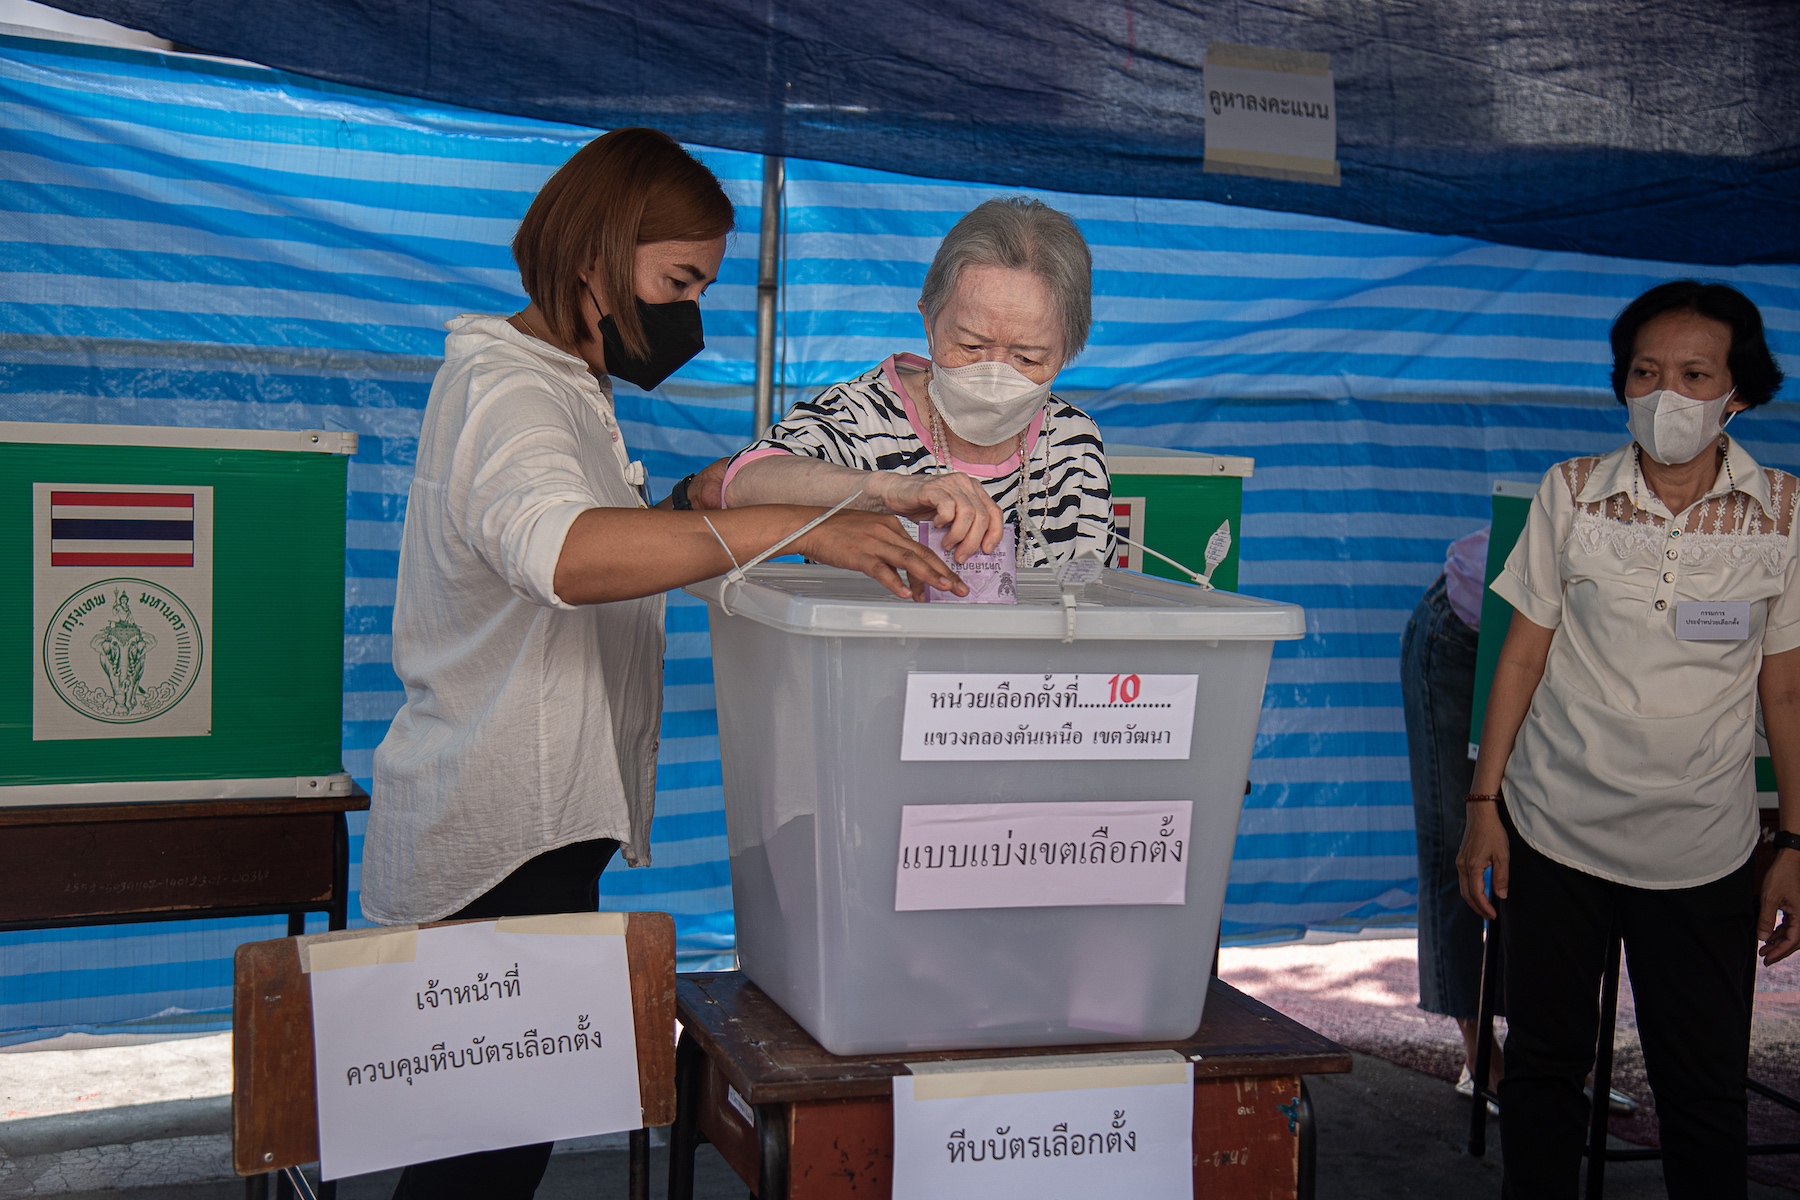 An older woman casts her vote in the Thai general election with help from polling staff